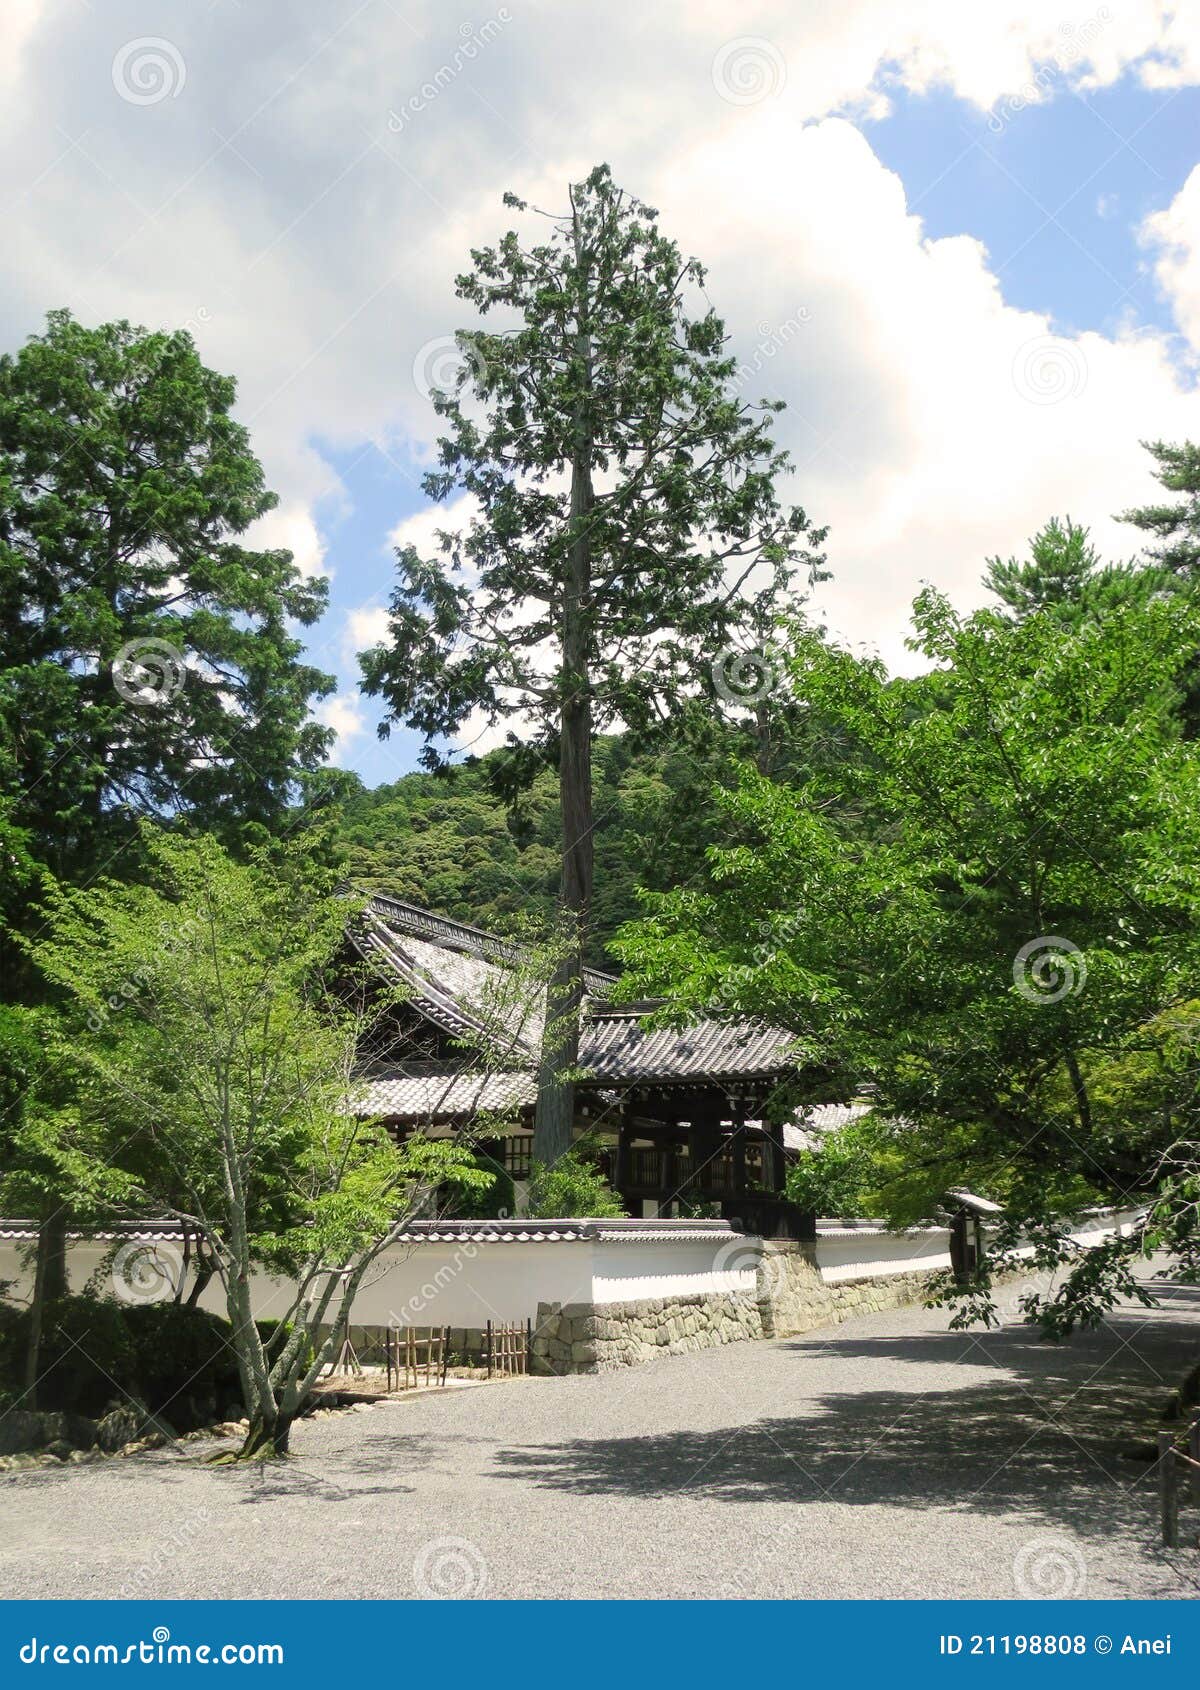 One of the Nanzenji Temple buildings. One of the buildings in the Zen rock garden at Nanzenji Temple, Kyoto - Japan.